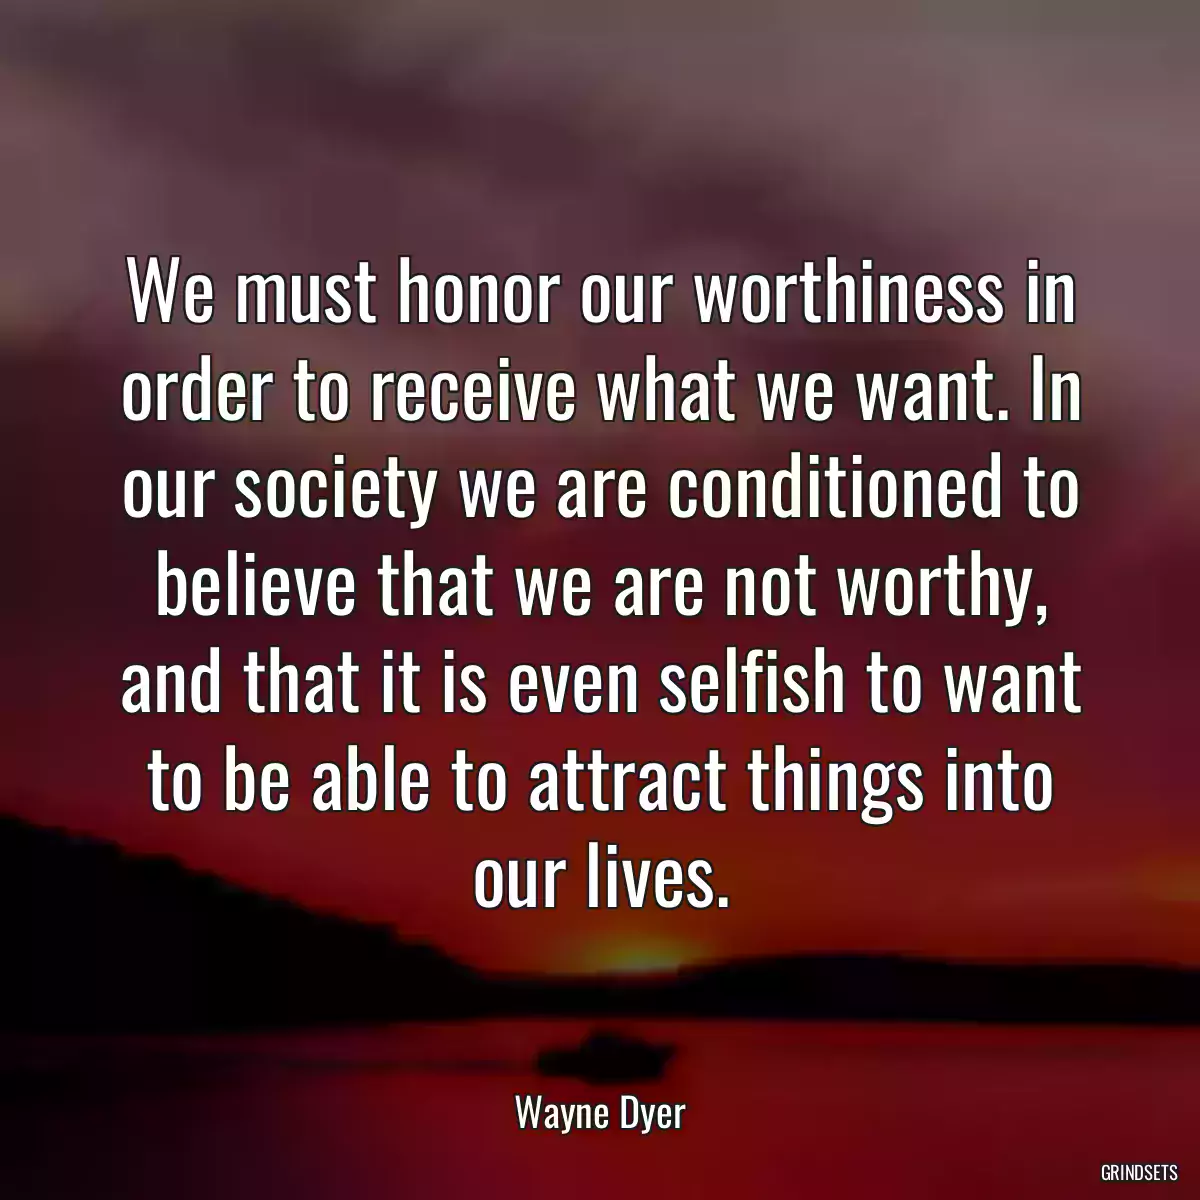 We must honor our worthiness in order to receive what we want. In our society we are conditioned to believe that we are not worthy, and that it is even selfish to want to be able to attract things into our lives.